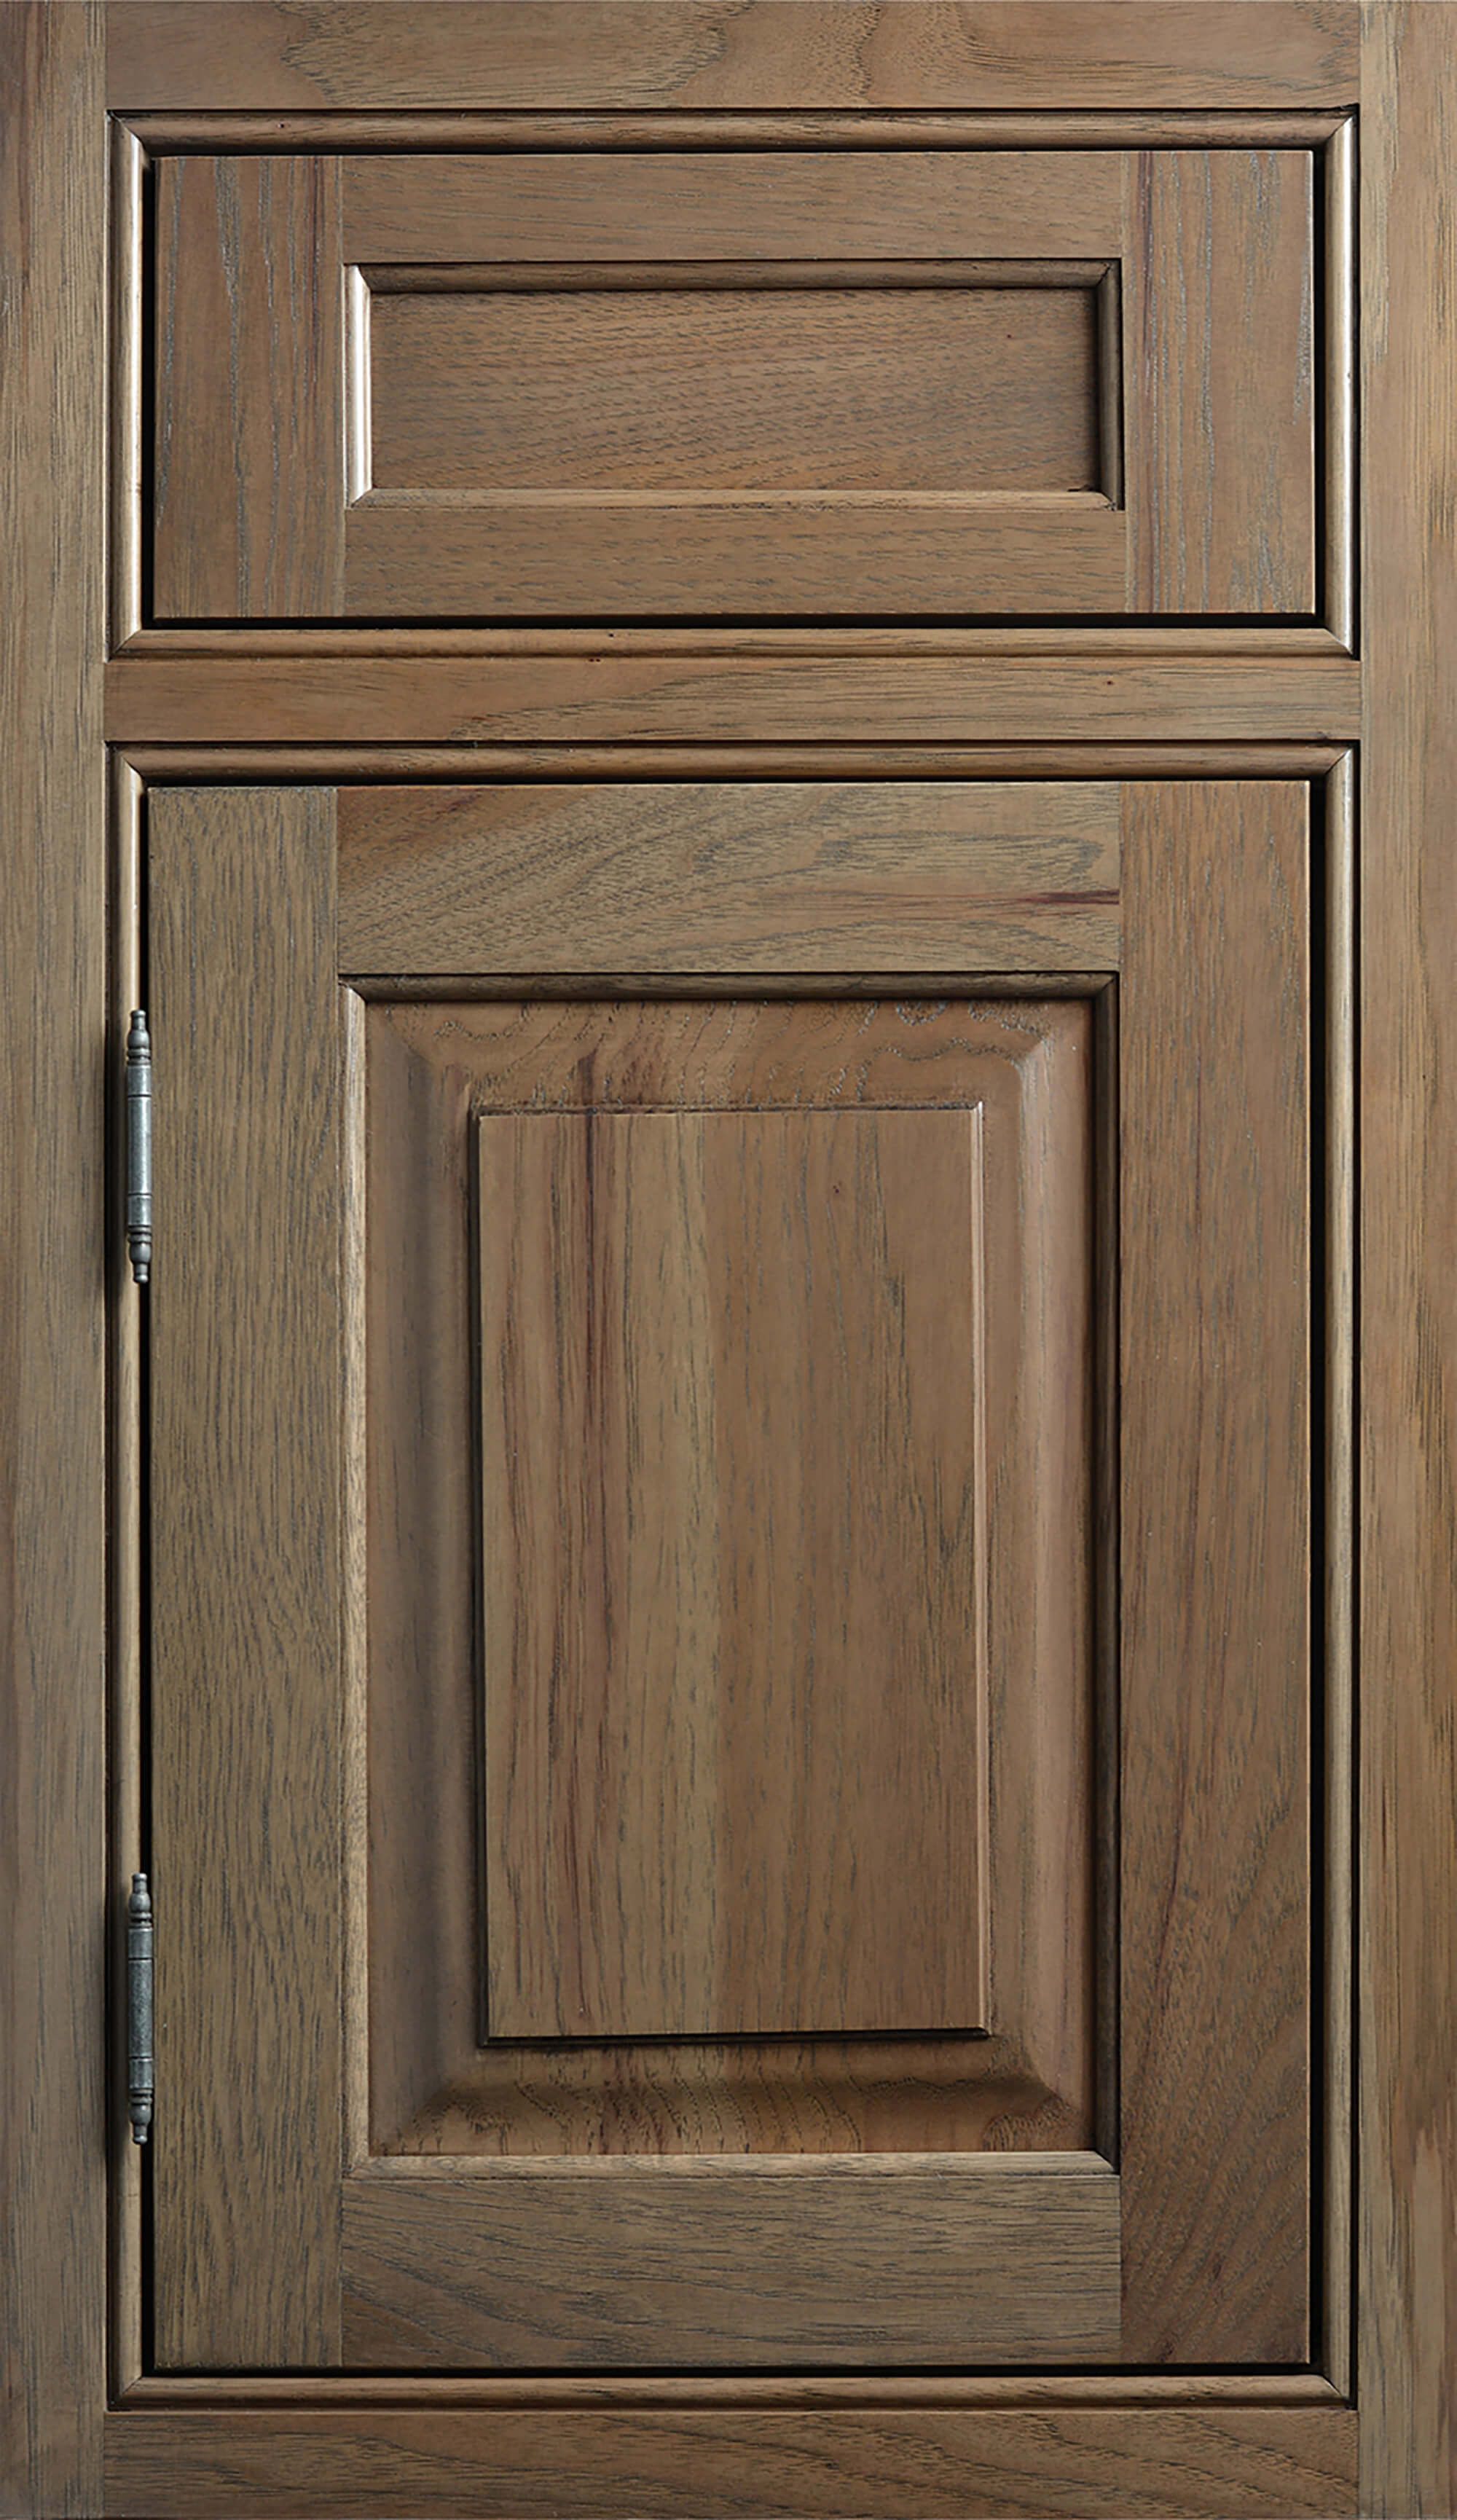 Dura Supreme Cabinetry, Inset Styling on the Kendall-Inset door style with Beaded Face Frame, one Barrel, and one Concealed Hinging